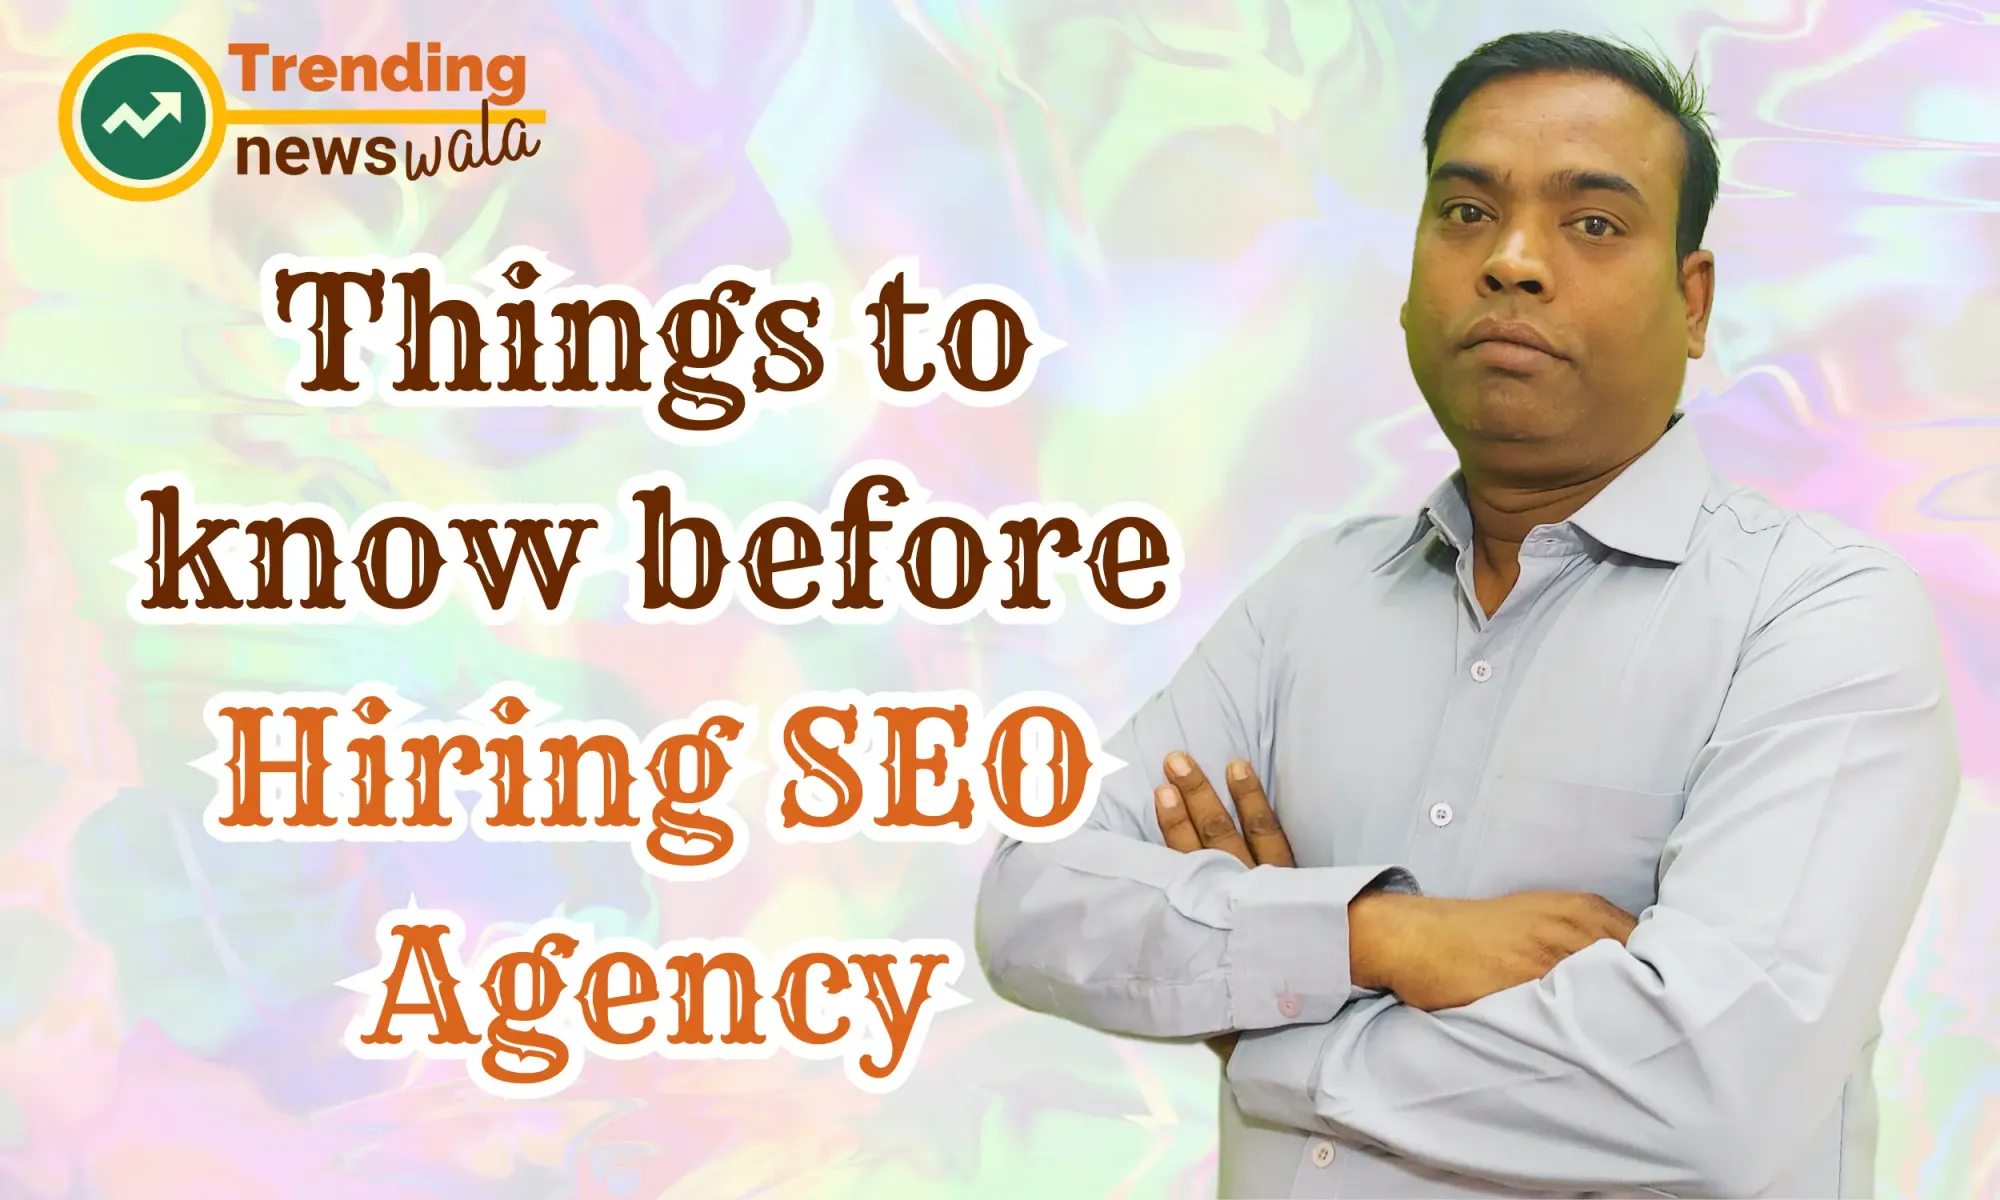 10 Things to know before Hiring SEO Agency